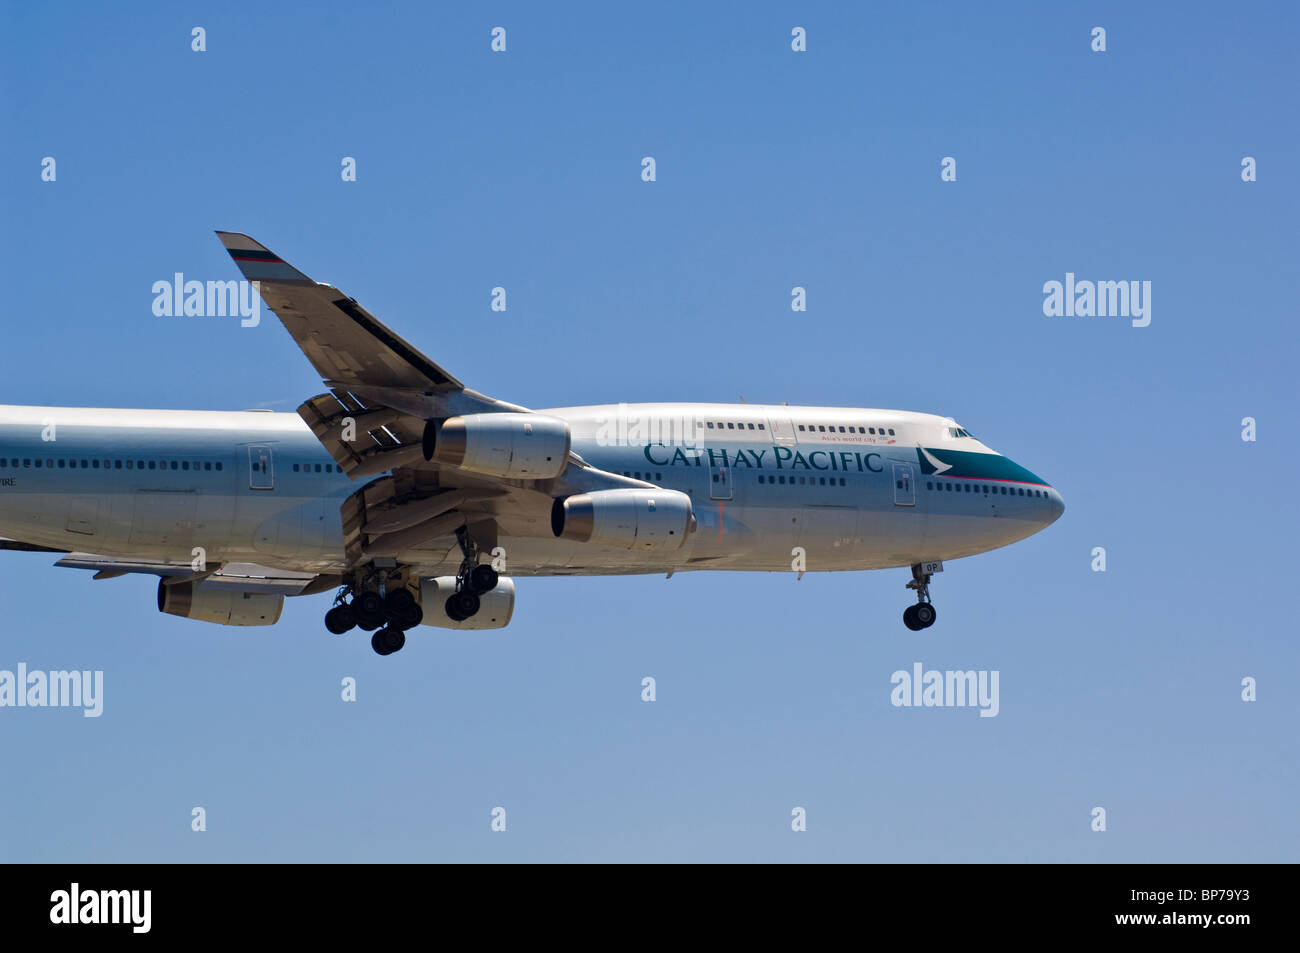 Cathay Pacific Boeing 747-400 landing at Los Angeles Int'l Airport, Los Angeles, California Stock Photo